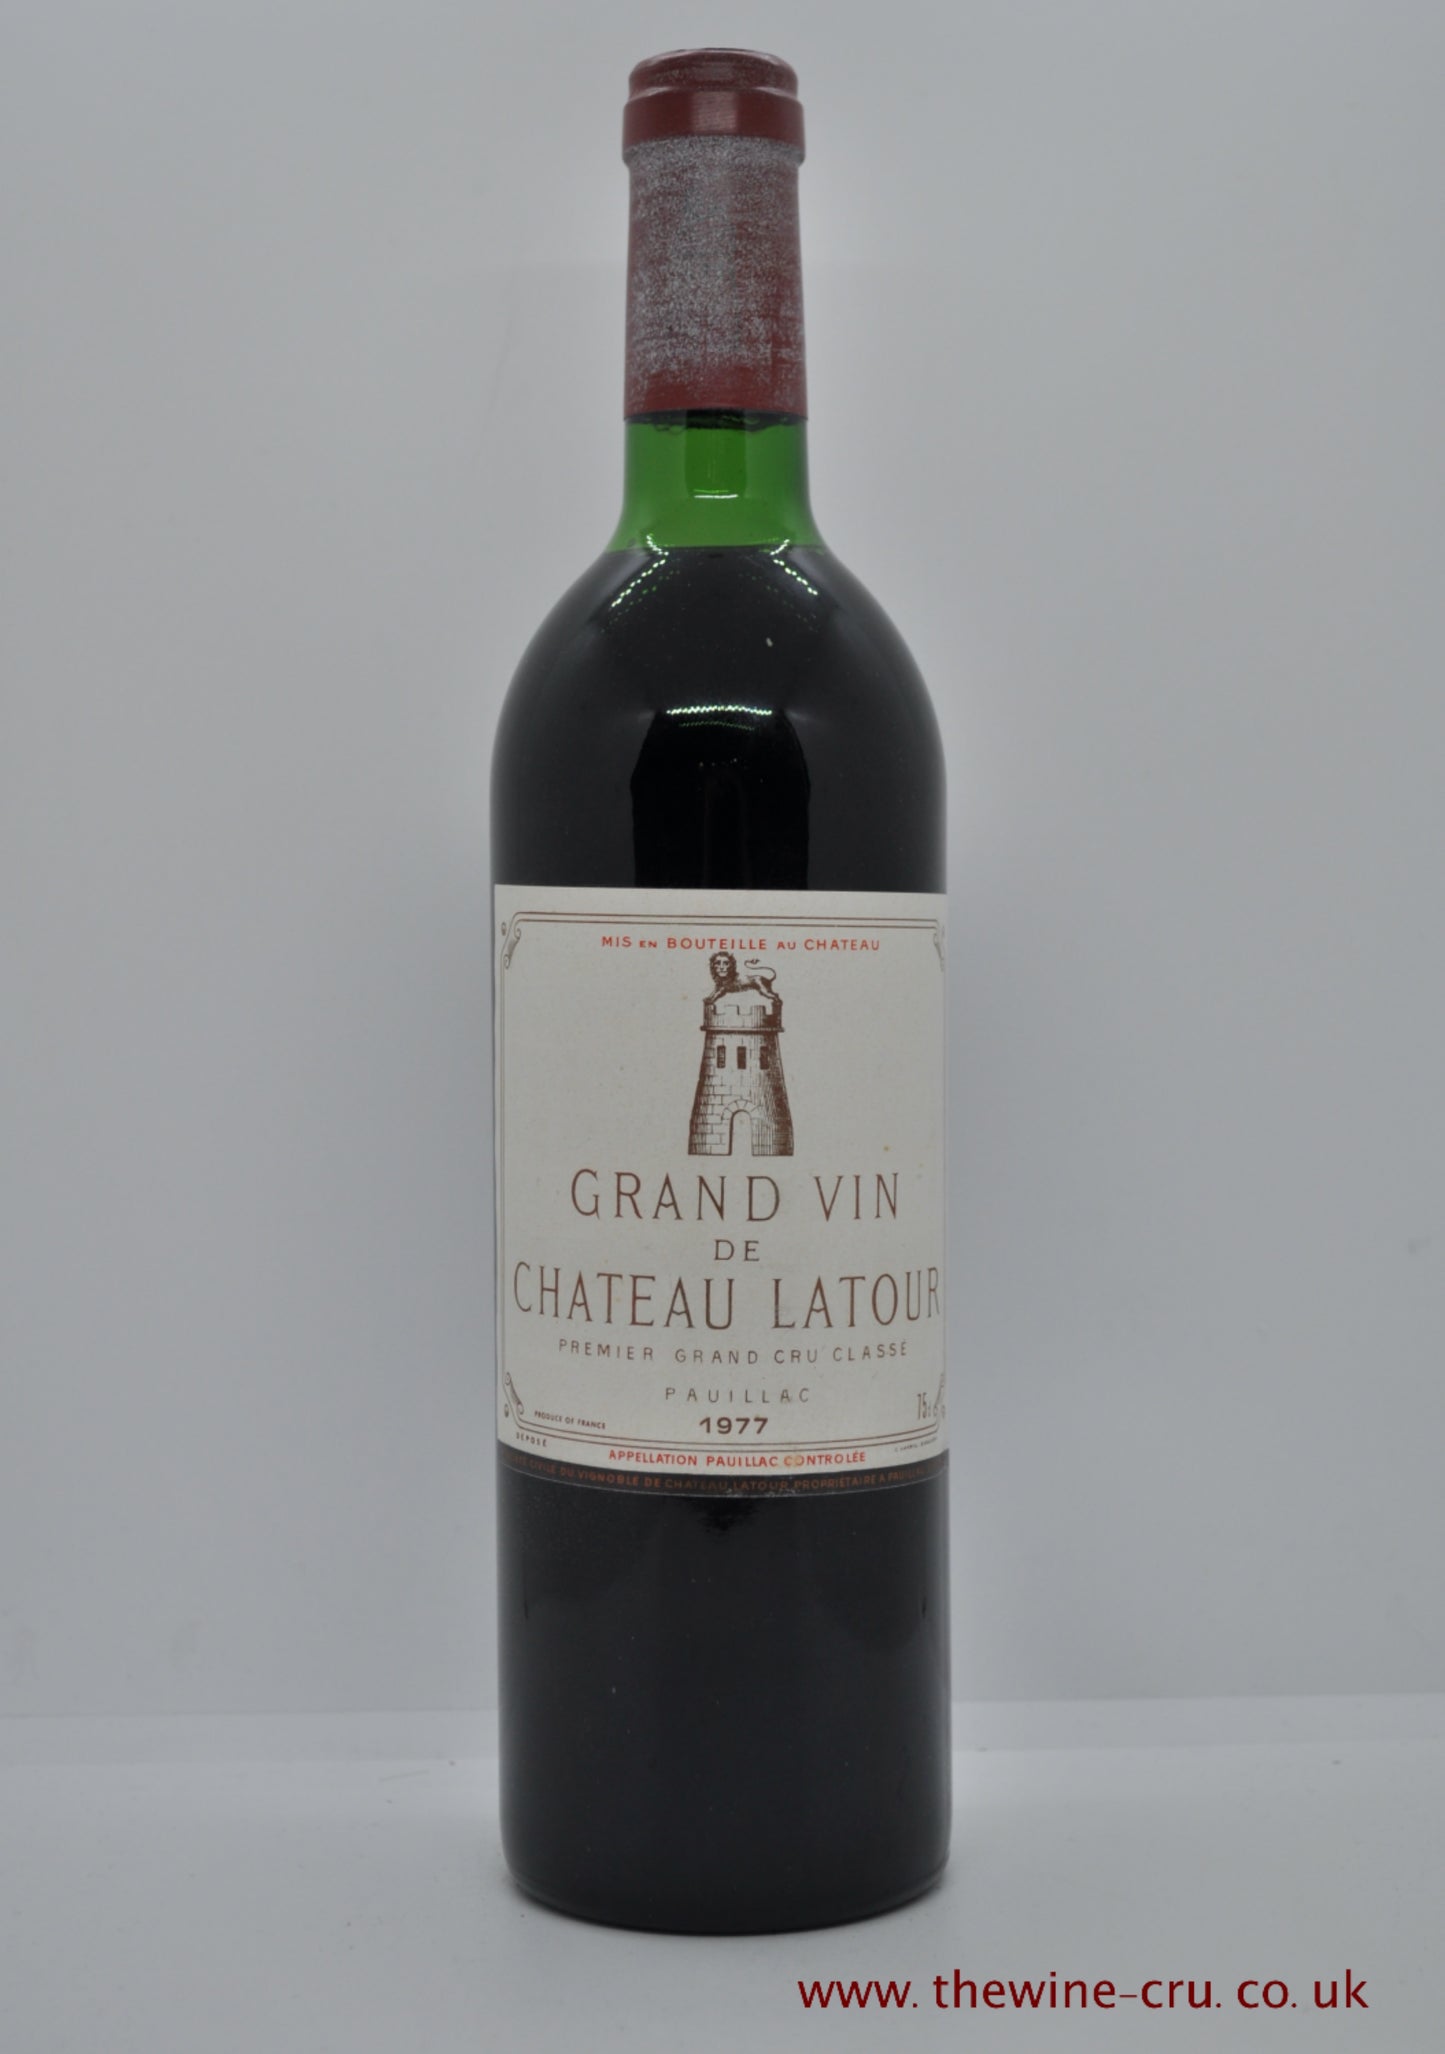 1977 vintage red wine. Chateau Latour 1977. France, Bordeaux. Capsule a little faded. Good label and wine level very top shoulder. Immediate delivery. Free local deliver. Gift wrapping available.